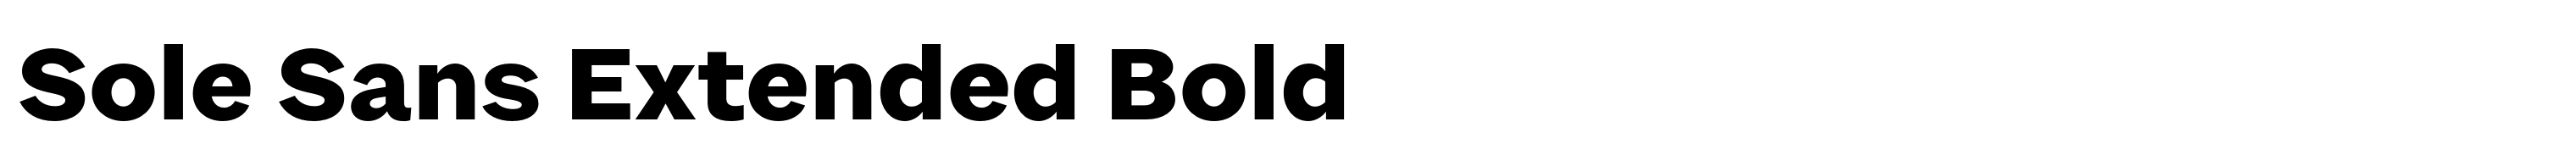 Sole Sans Extended Bold